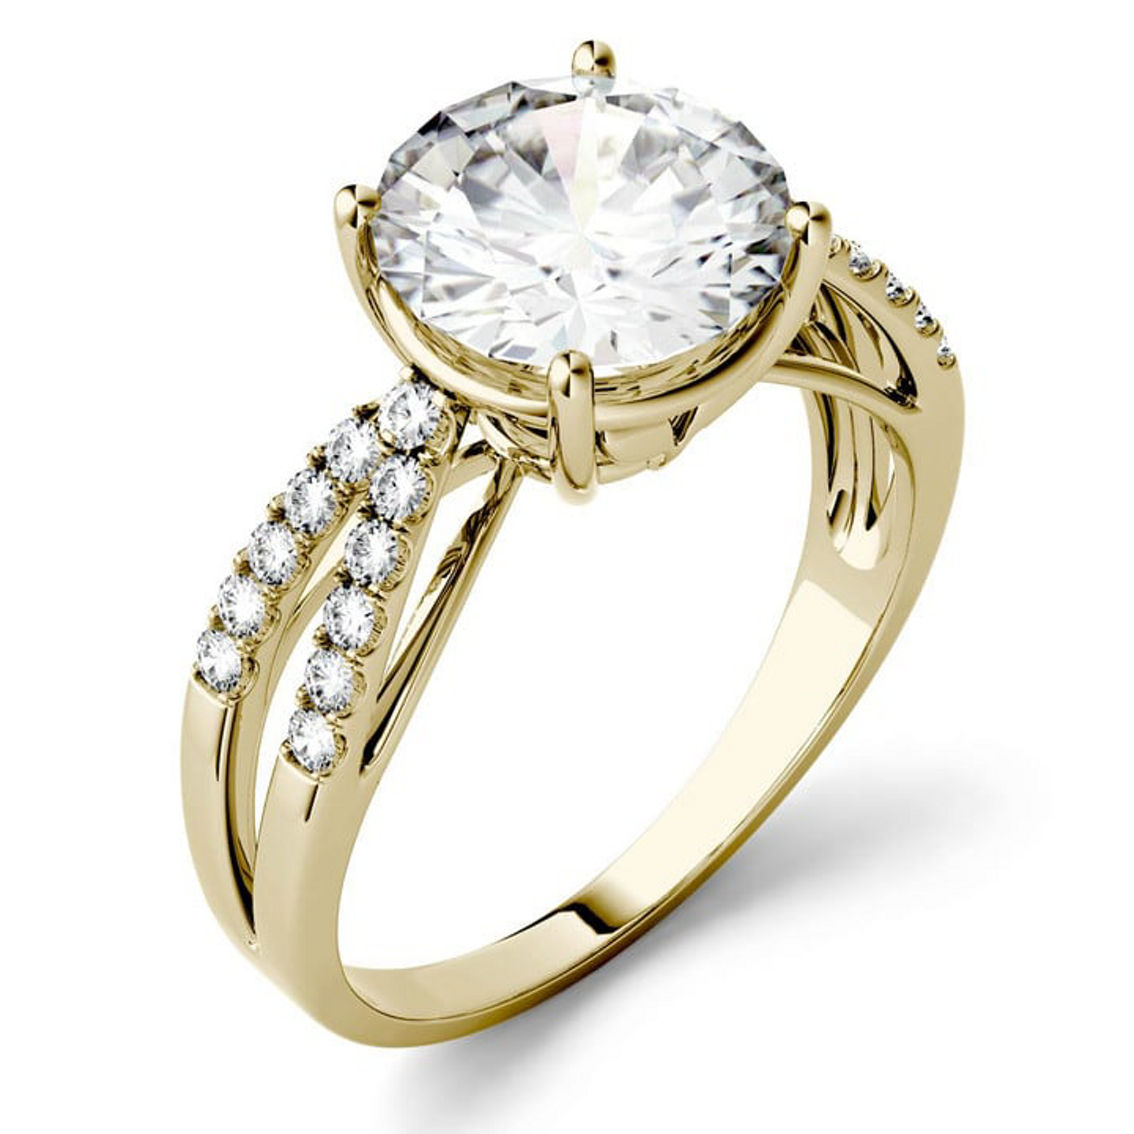 Charles & Colvard 2.92cttw Moissanite Engagement Ring in 14k Yellow Gold - Image 2 of 5